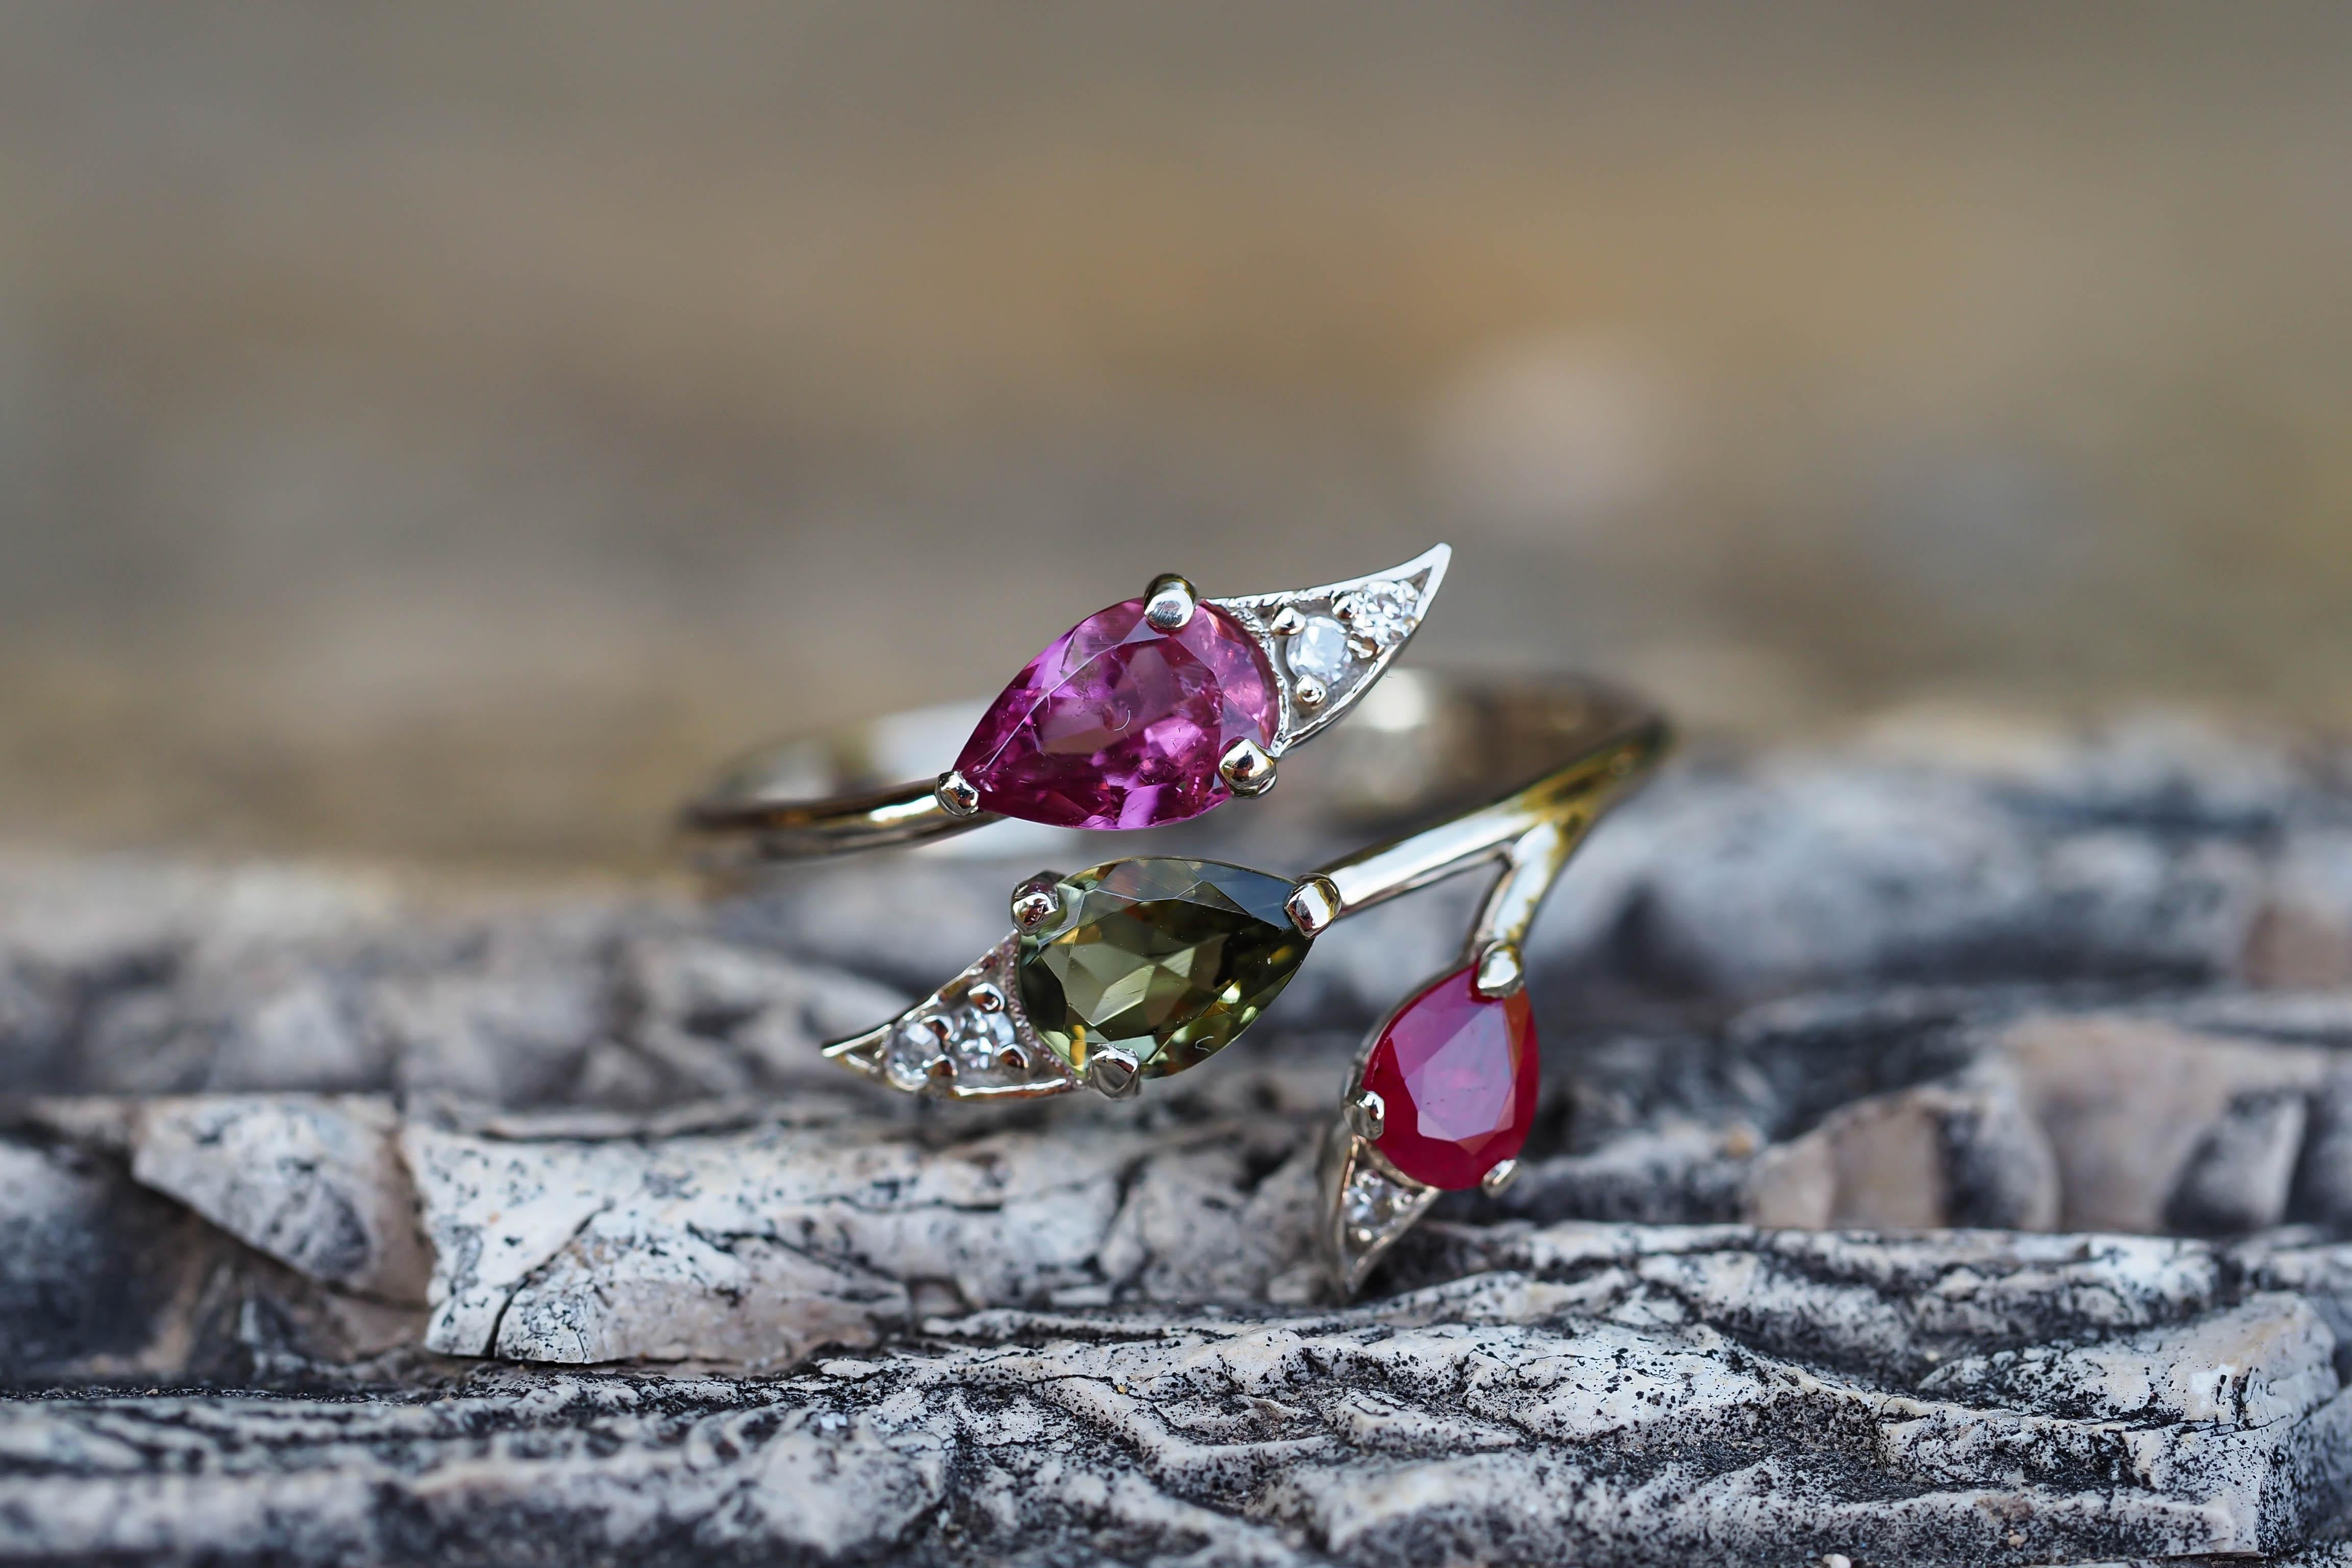 For Sale:  3 gemstone ring. Tourmalines and ruby gold ring. Multicolor gemstones ring. 11